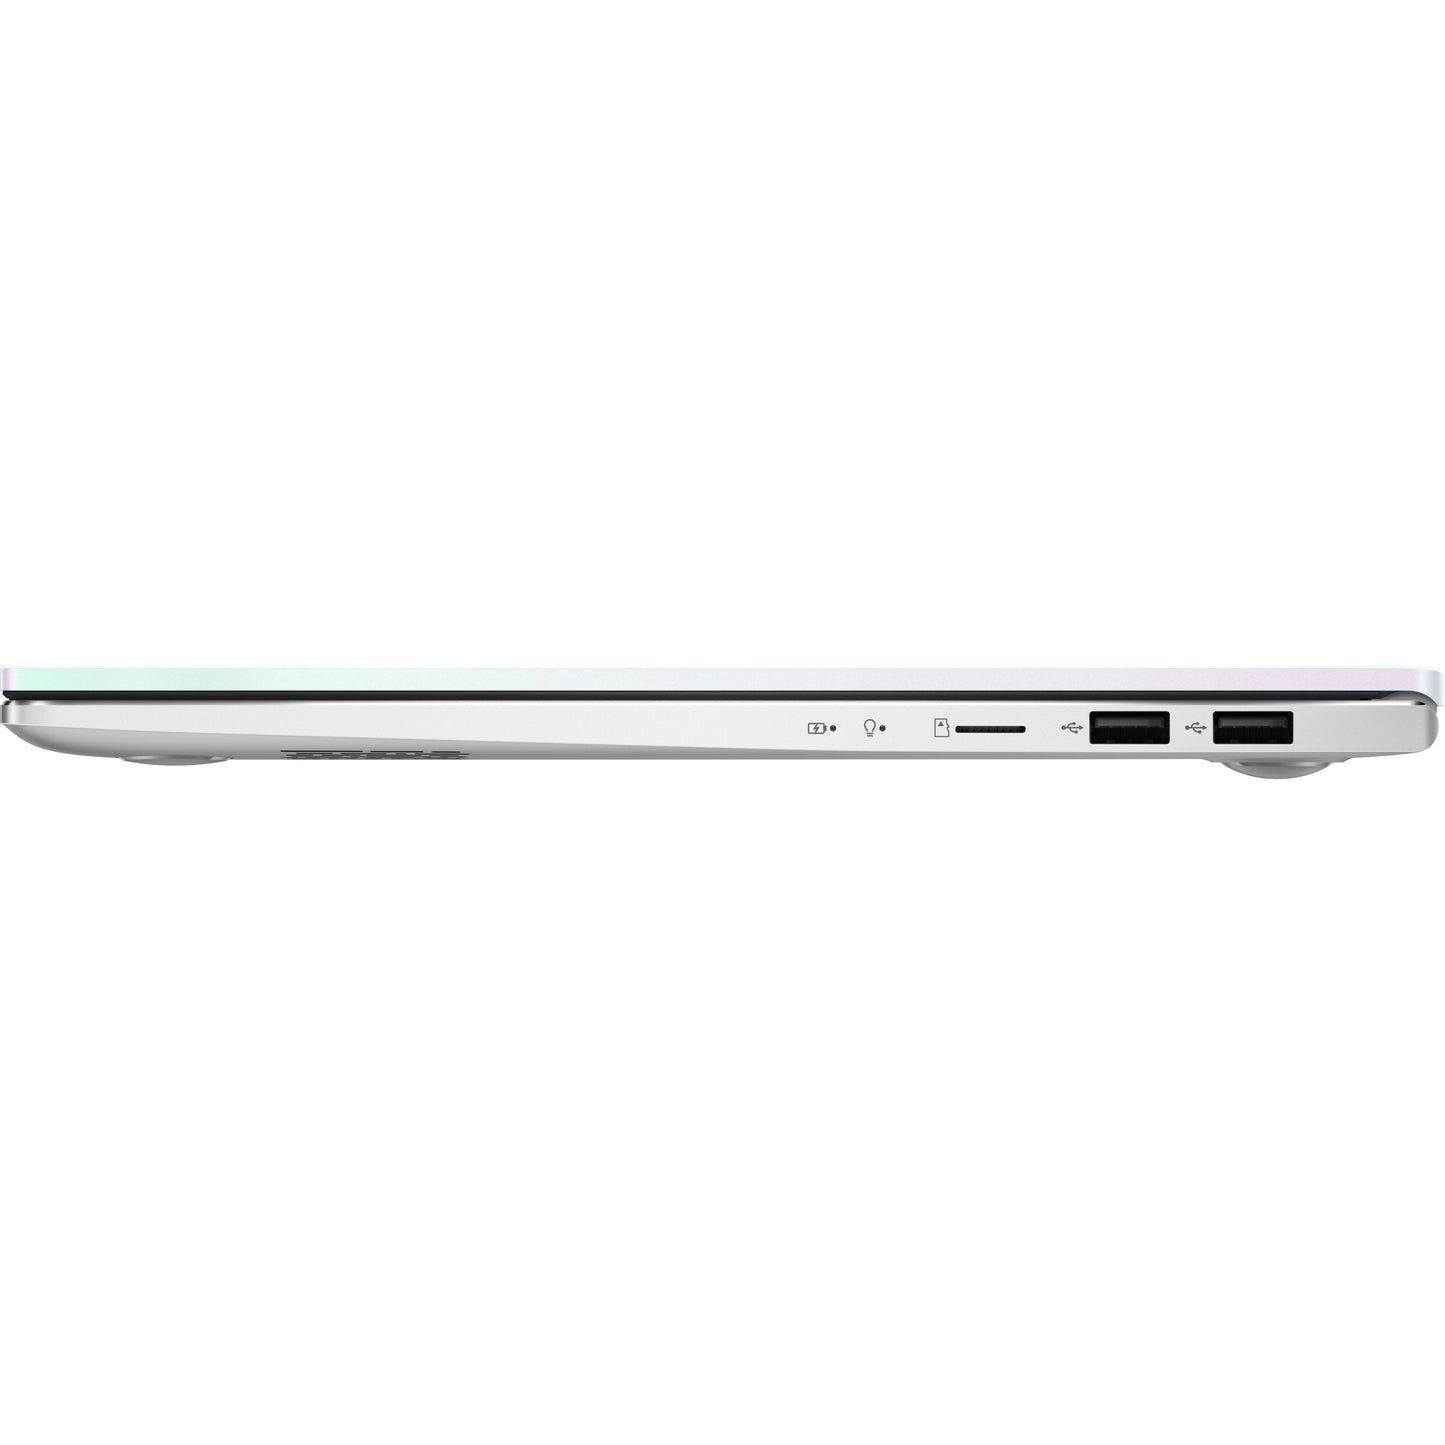 Asus VivoBook S15 S533 S533EA-DH74-WH 15.6" Notebook - Full HD - 1920 x 1080 - Intel Core i7 i7-1165G7 Quad-core (4 Core) 2.80 GHz - 16 GB Total RAM - 512 GB SSD